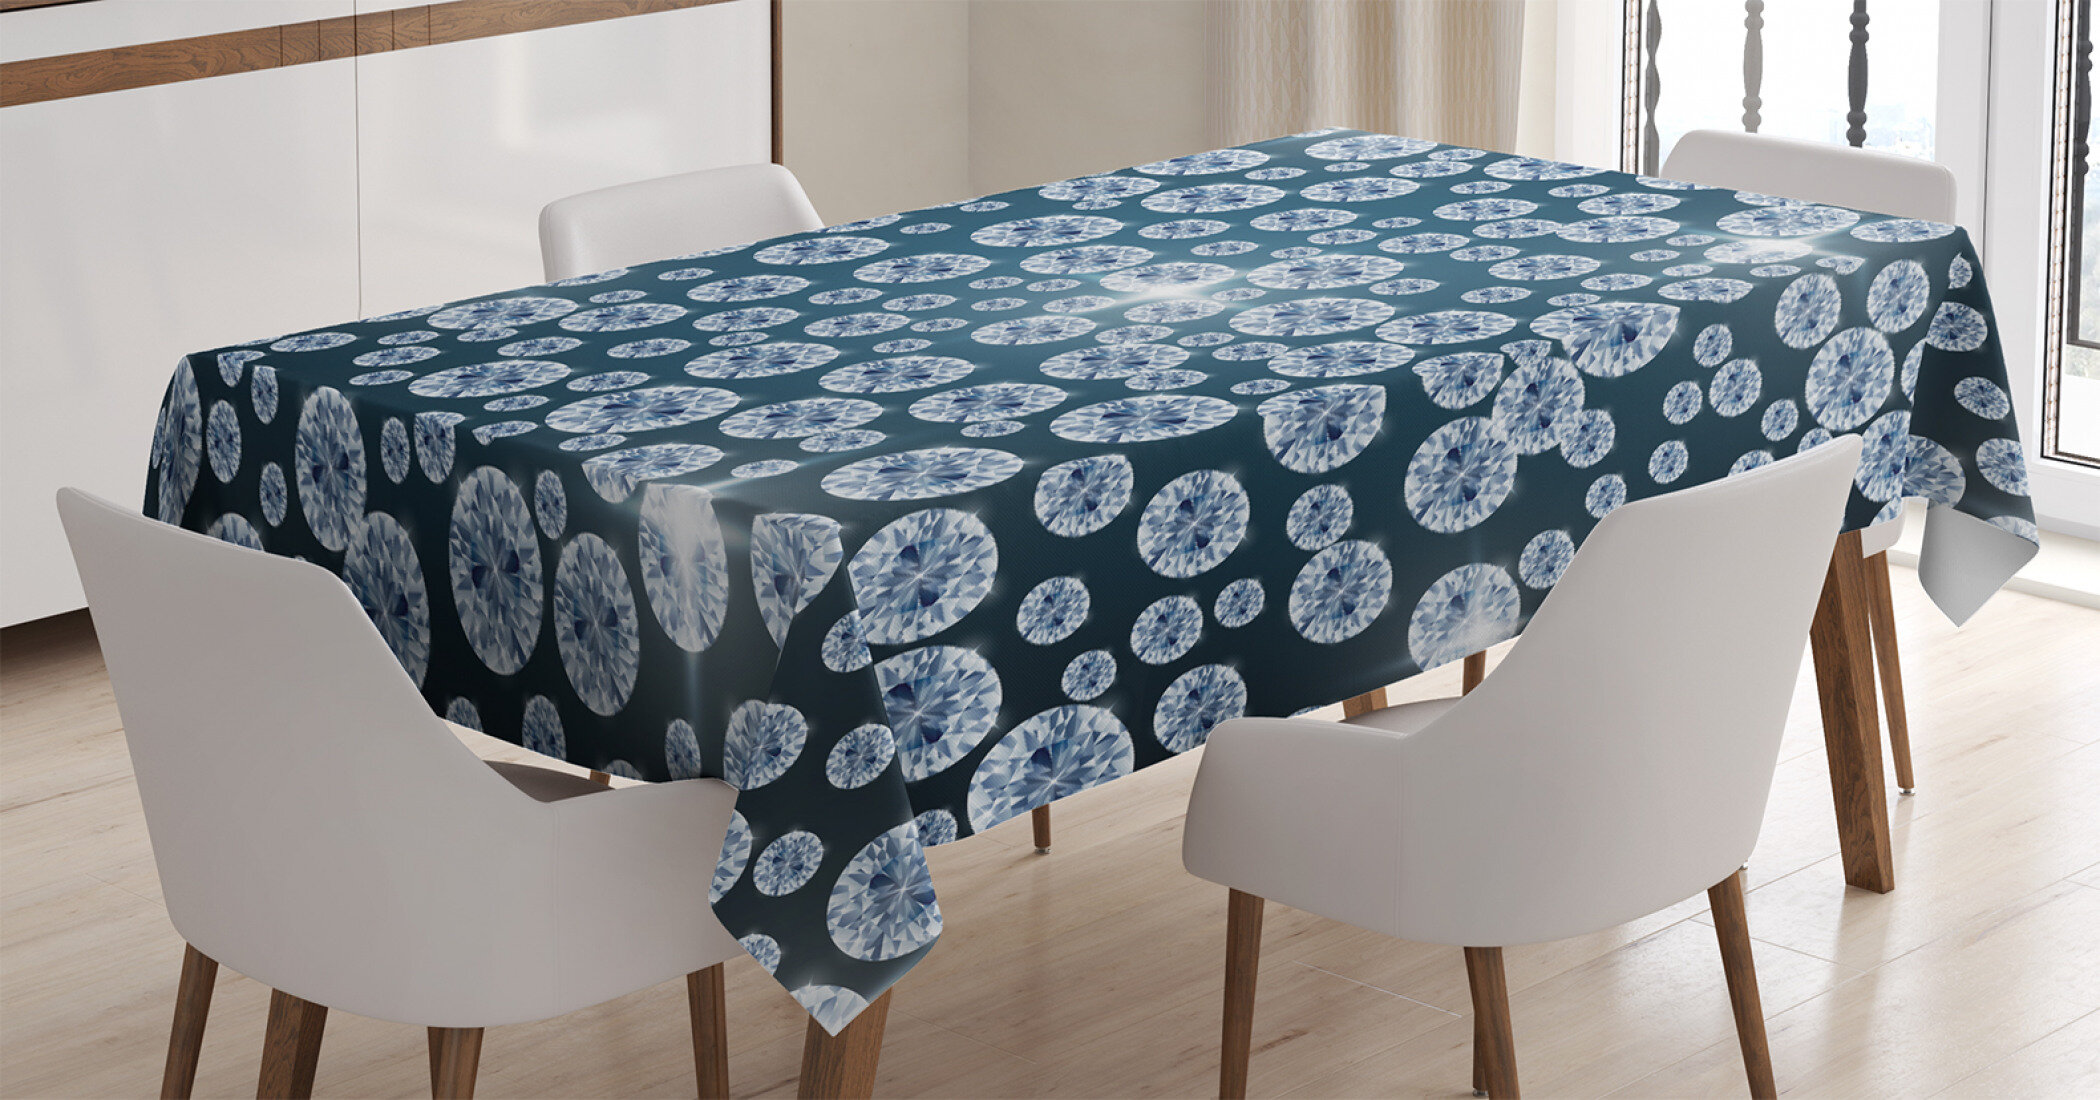 Printed Tablecloths Tablecloths Made to order! Bright Diamonds Custom Printed Diamond Design Tablecloth